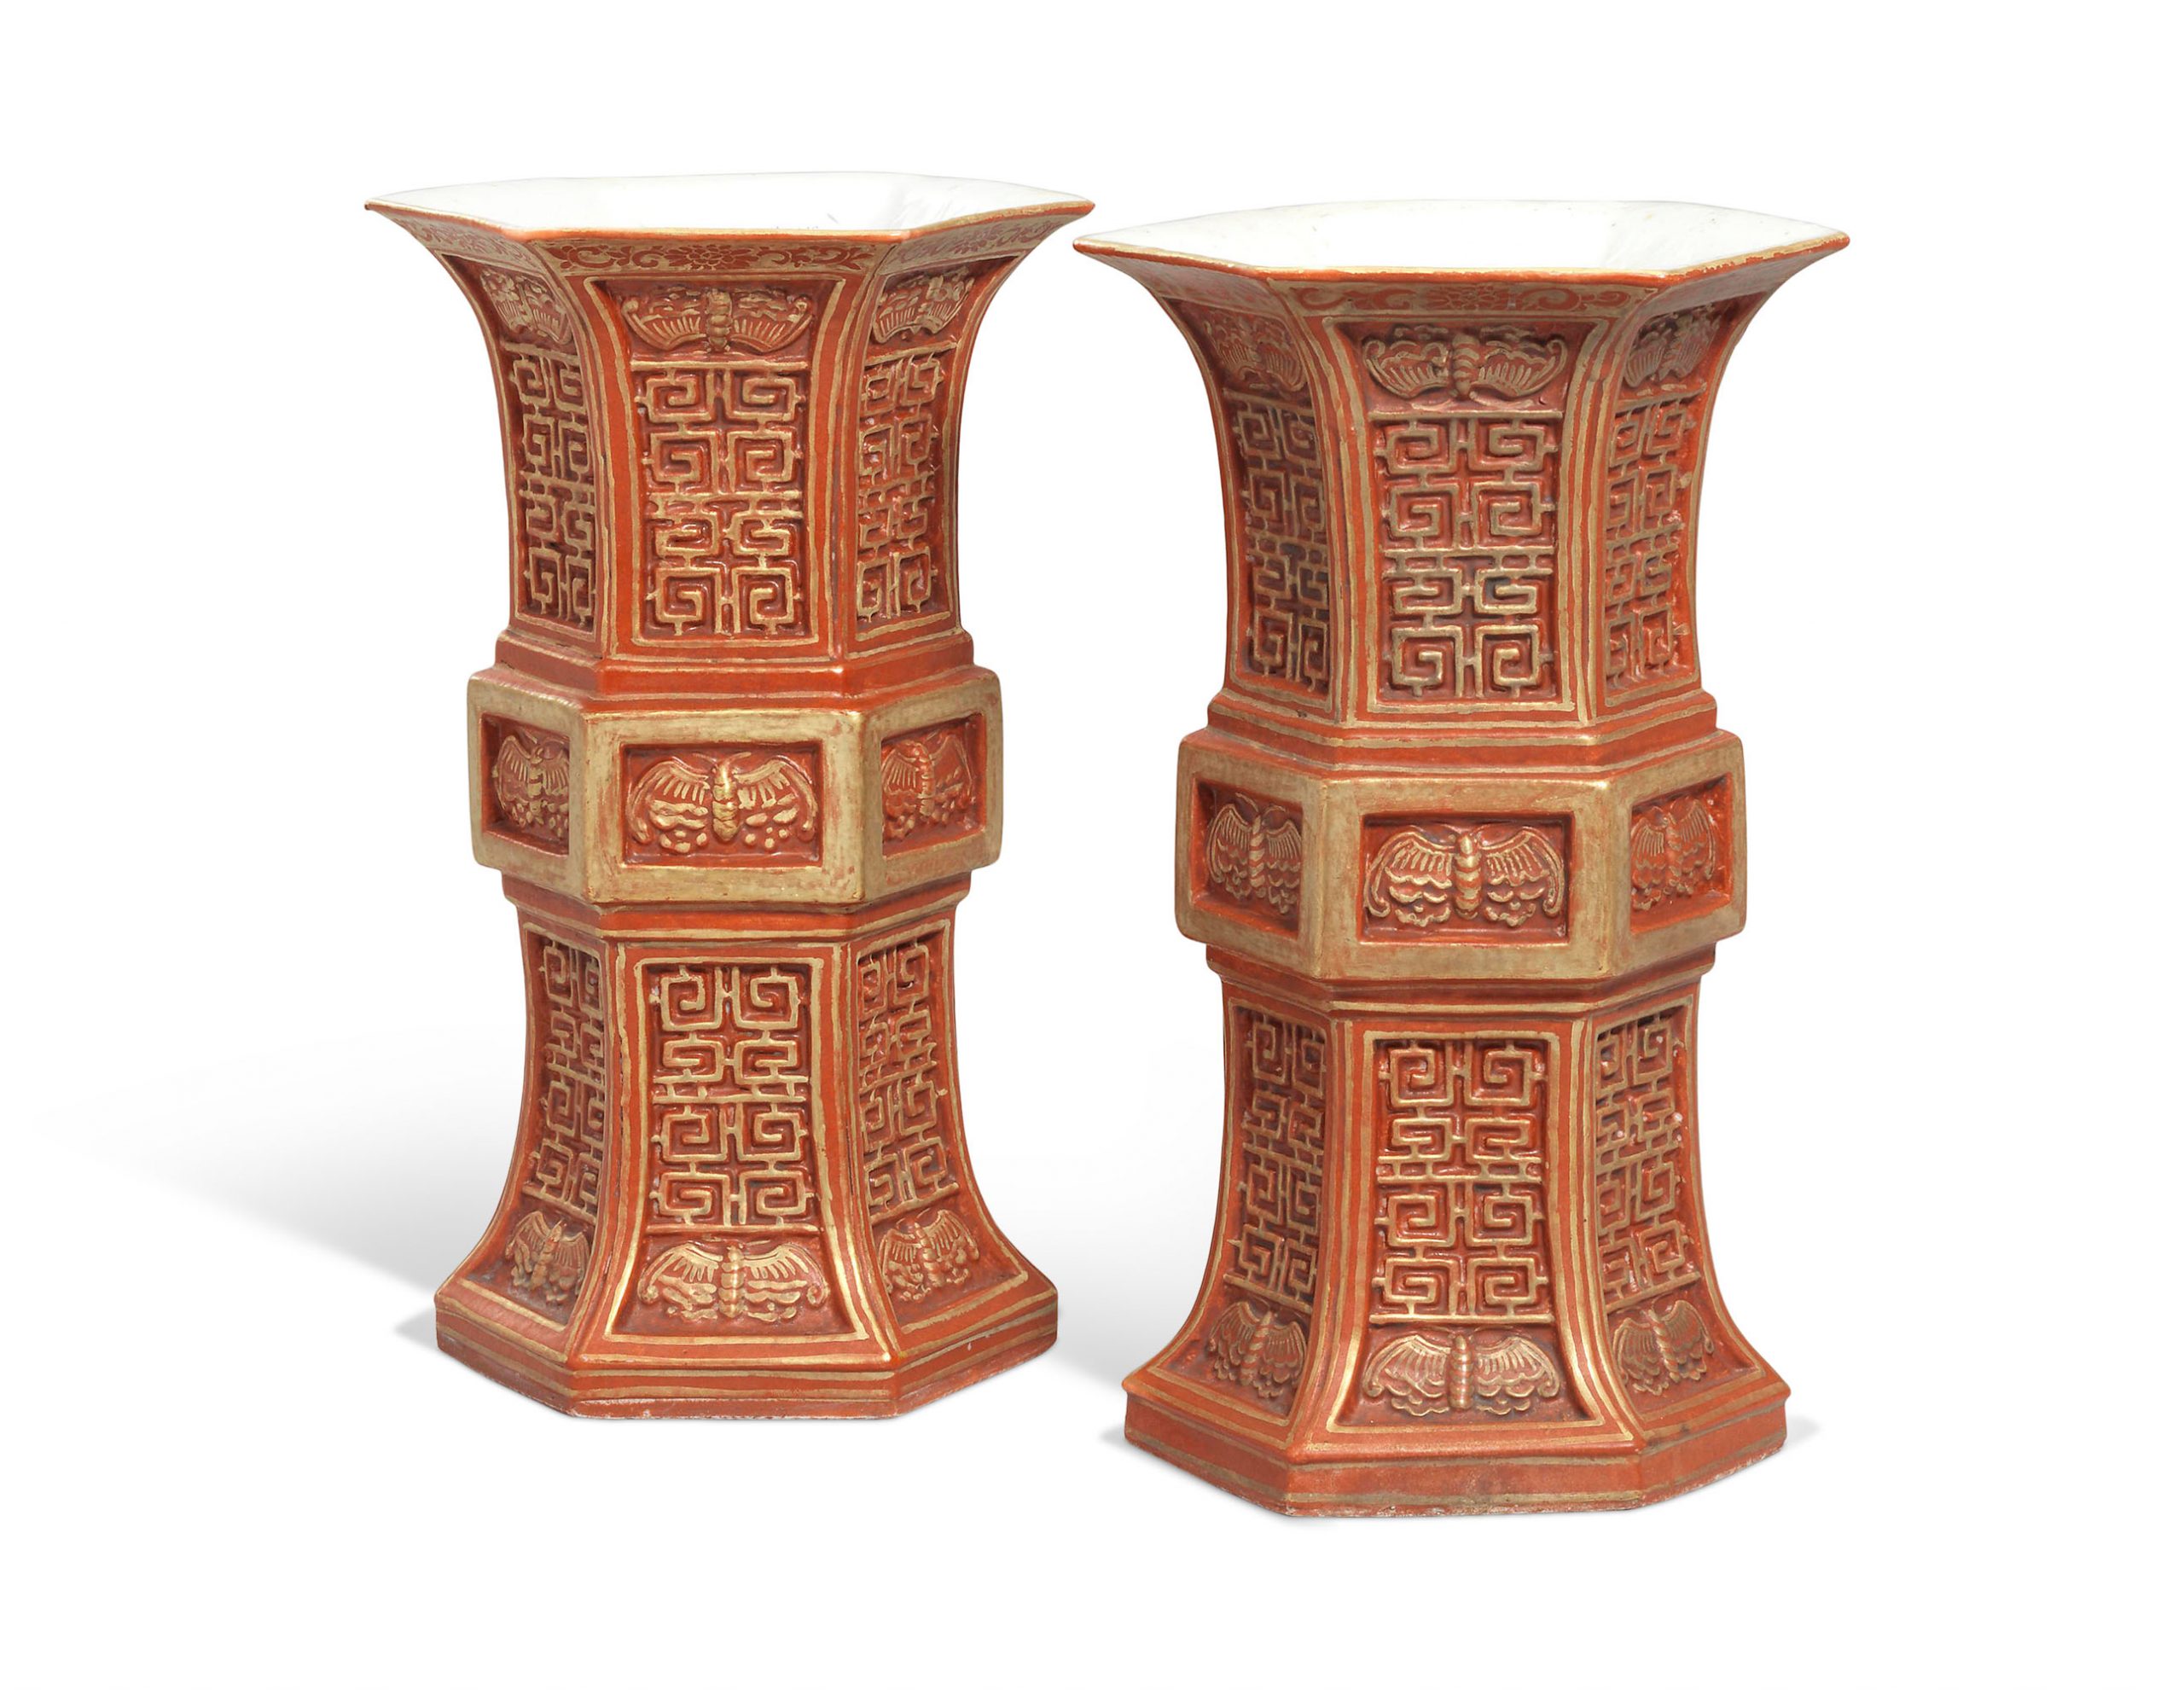 A PAIR OF CORAL-GROUND AND GILT-DECORATED HEXAGONAL VASES